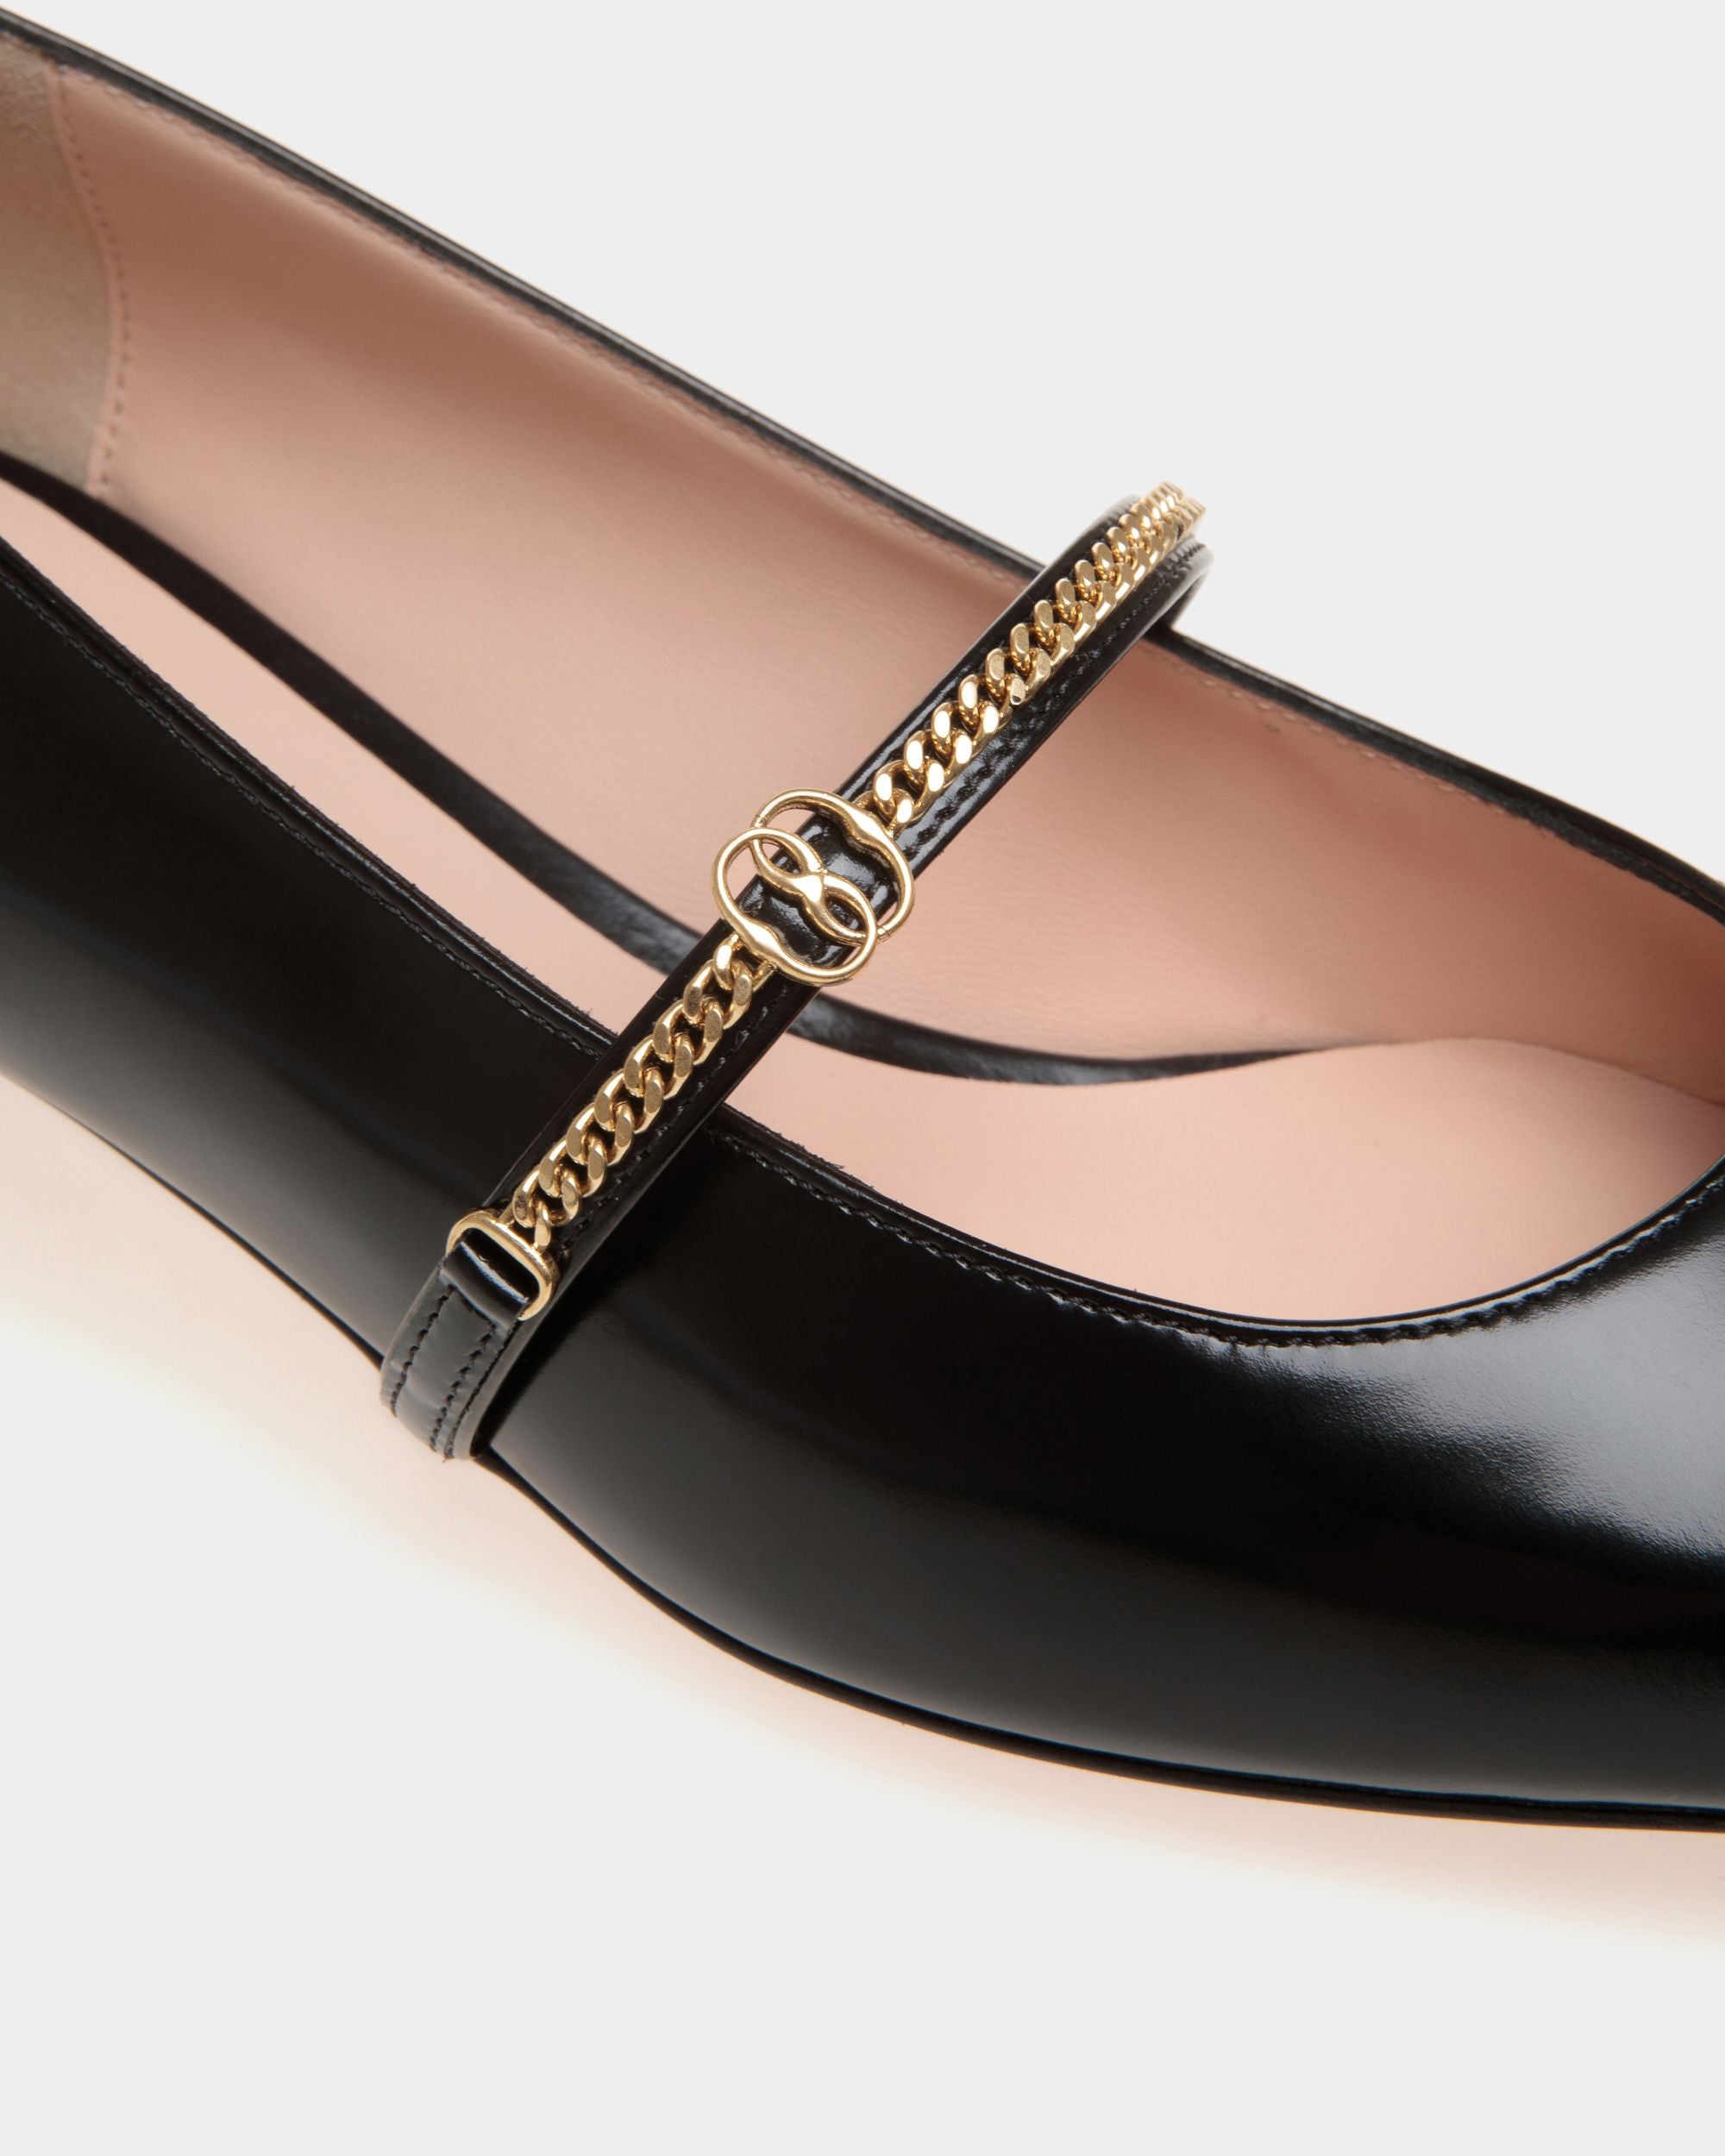 Sylt | Women's Mary-Jane Pump in Black Leather | Bally | Still Life Detail